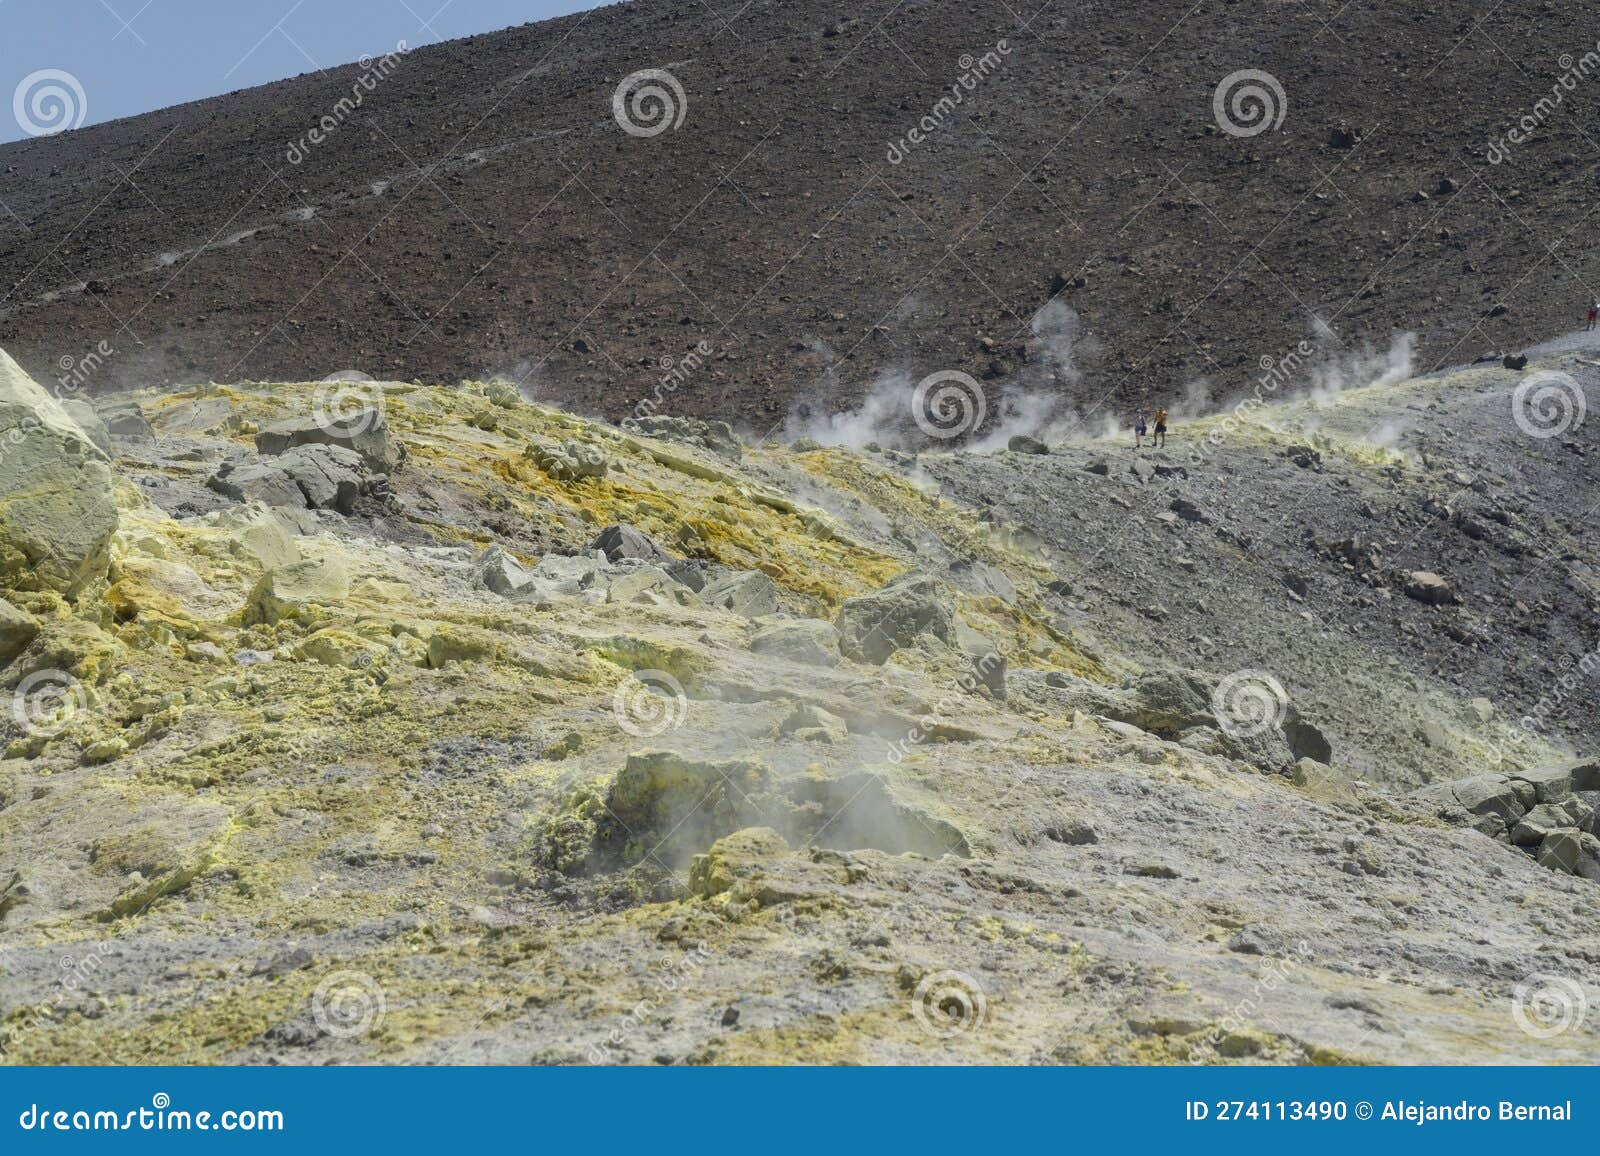 vulcano trekking with fumaroles and a couple of touris walking on the ground path with big mountain